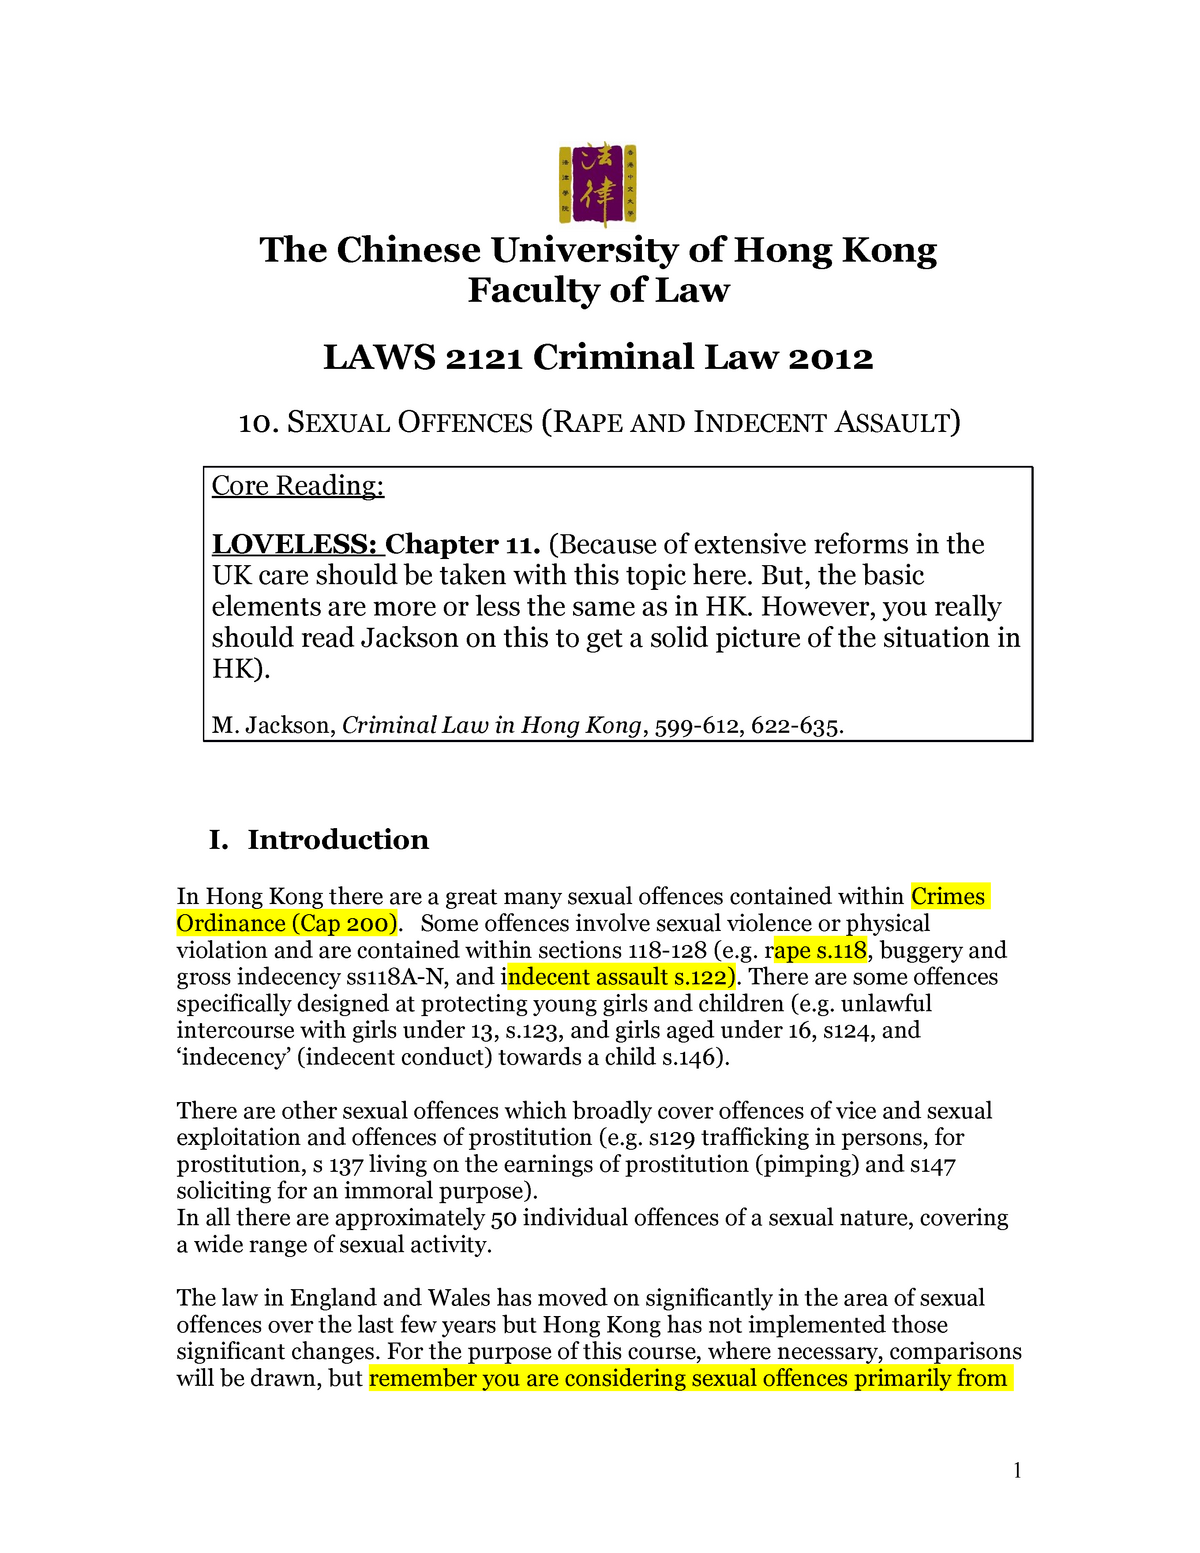 Handout Criminal Law1 Sexual Offence The Chinese University Of Hong Kong Faculty Of Law Laws